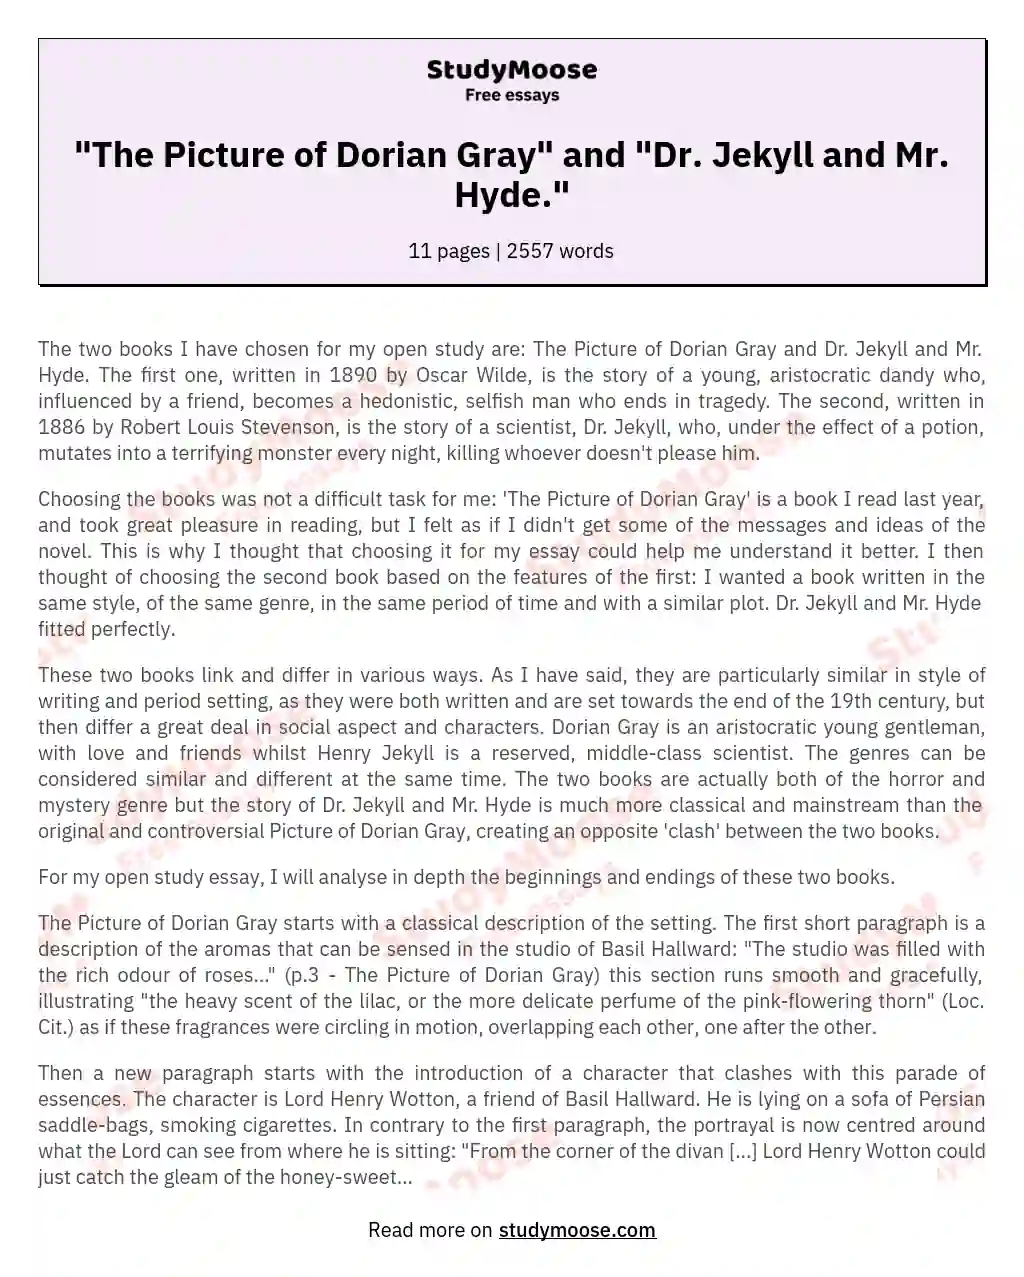 "The Picture of Dorian Gray" and "Dr. Jekyll and Mr. Hyde."